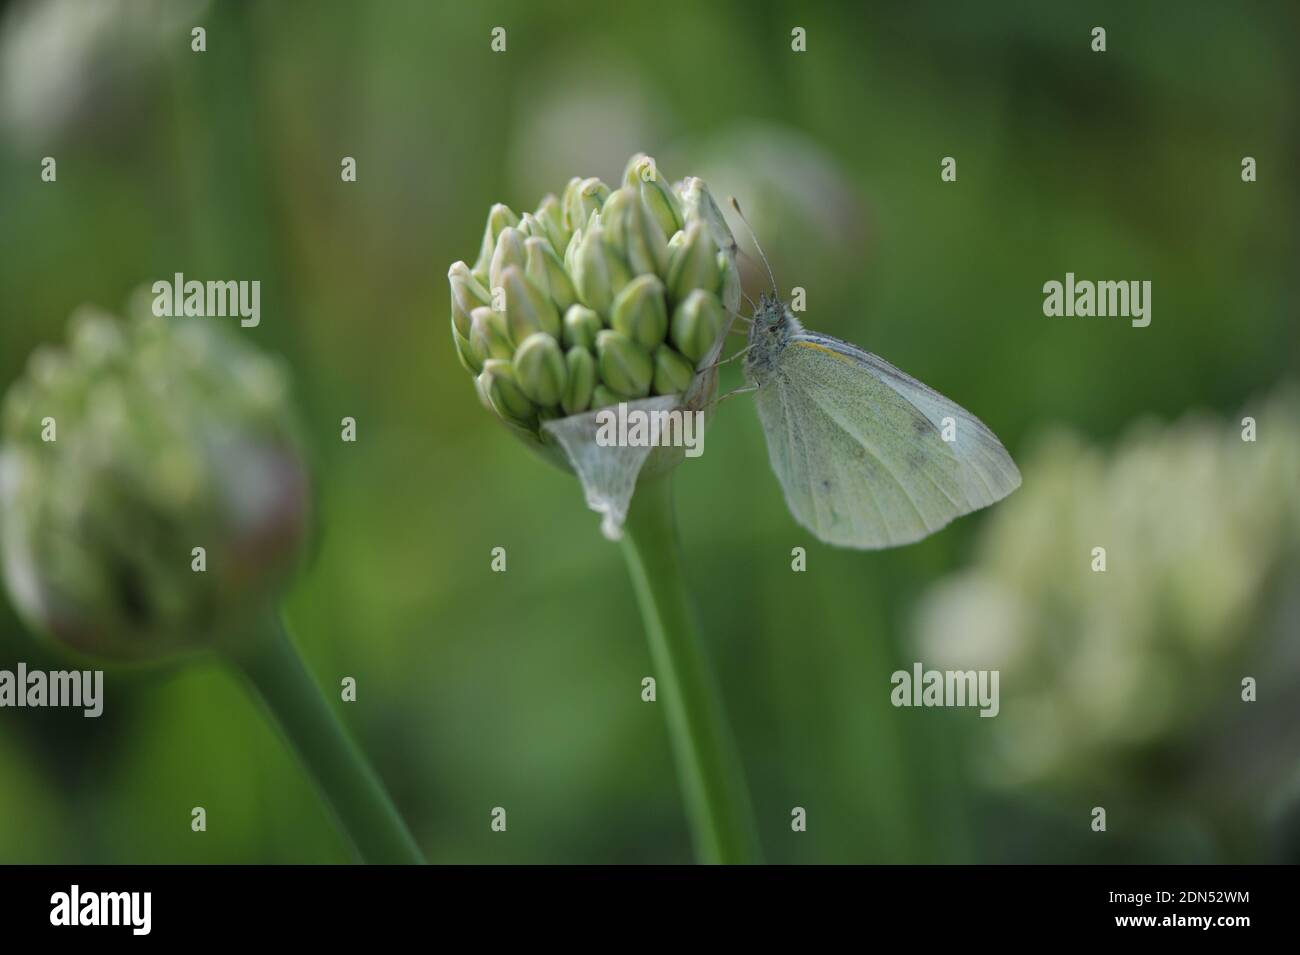 A clouseup of a butterfly sitting on a bud of Allium nigrum in a garden Stock Photo